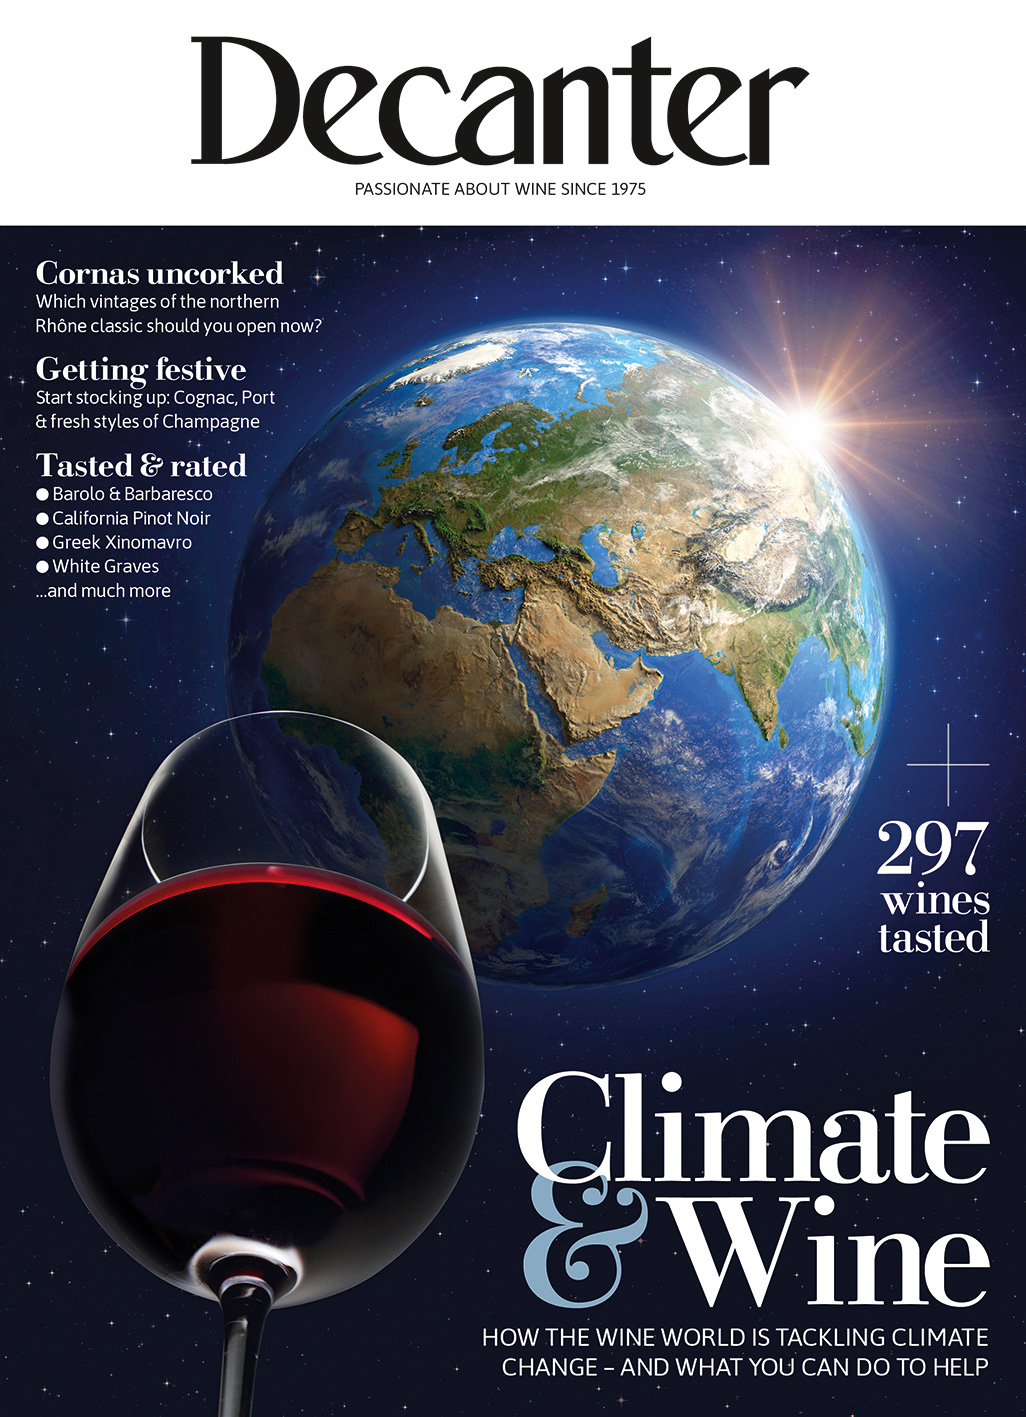 Decanter magazine latest issue out now: December 2021